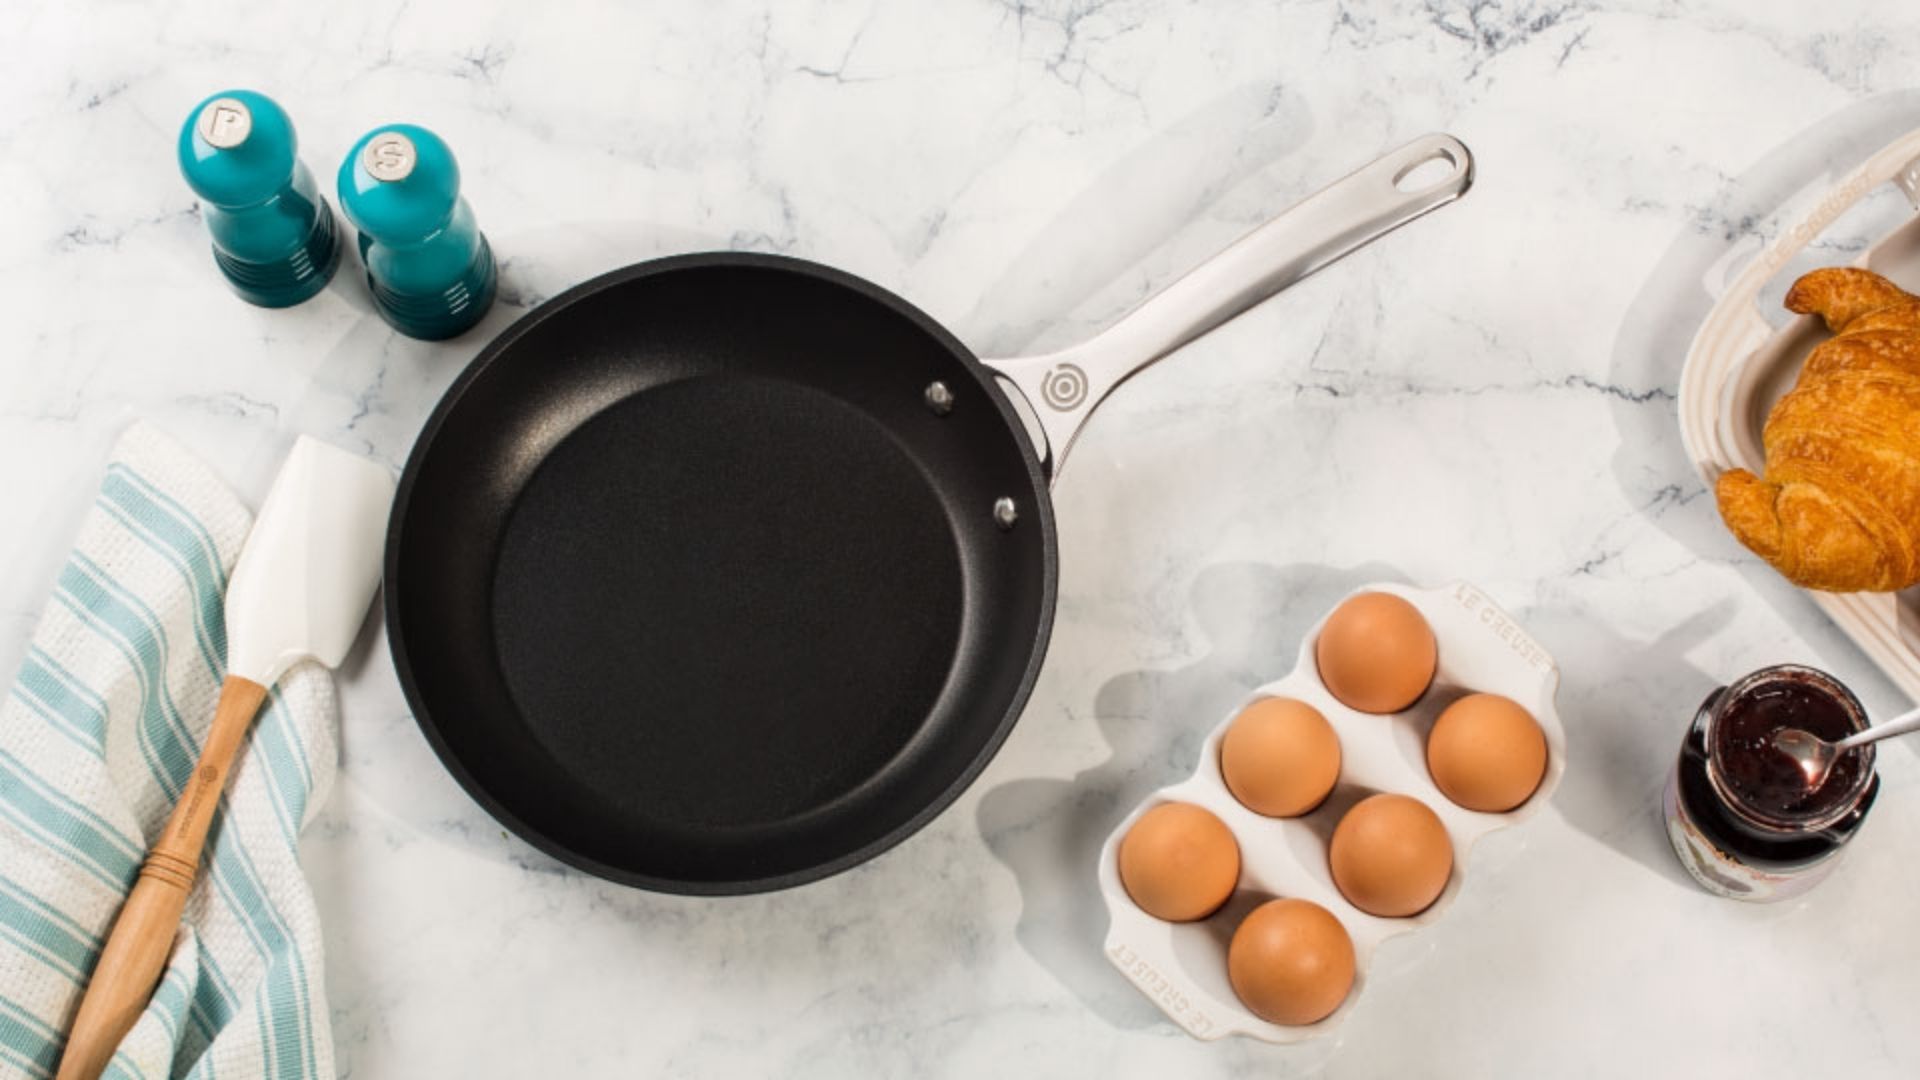 The no-nonsense guide to the best fry pans